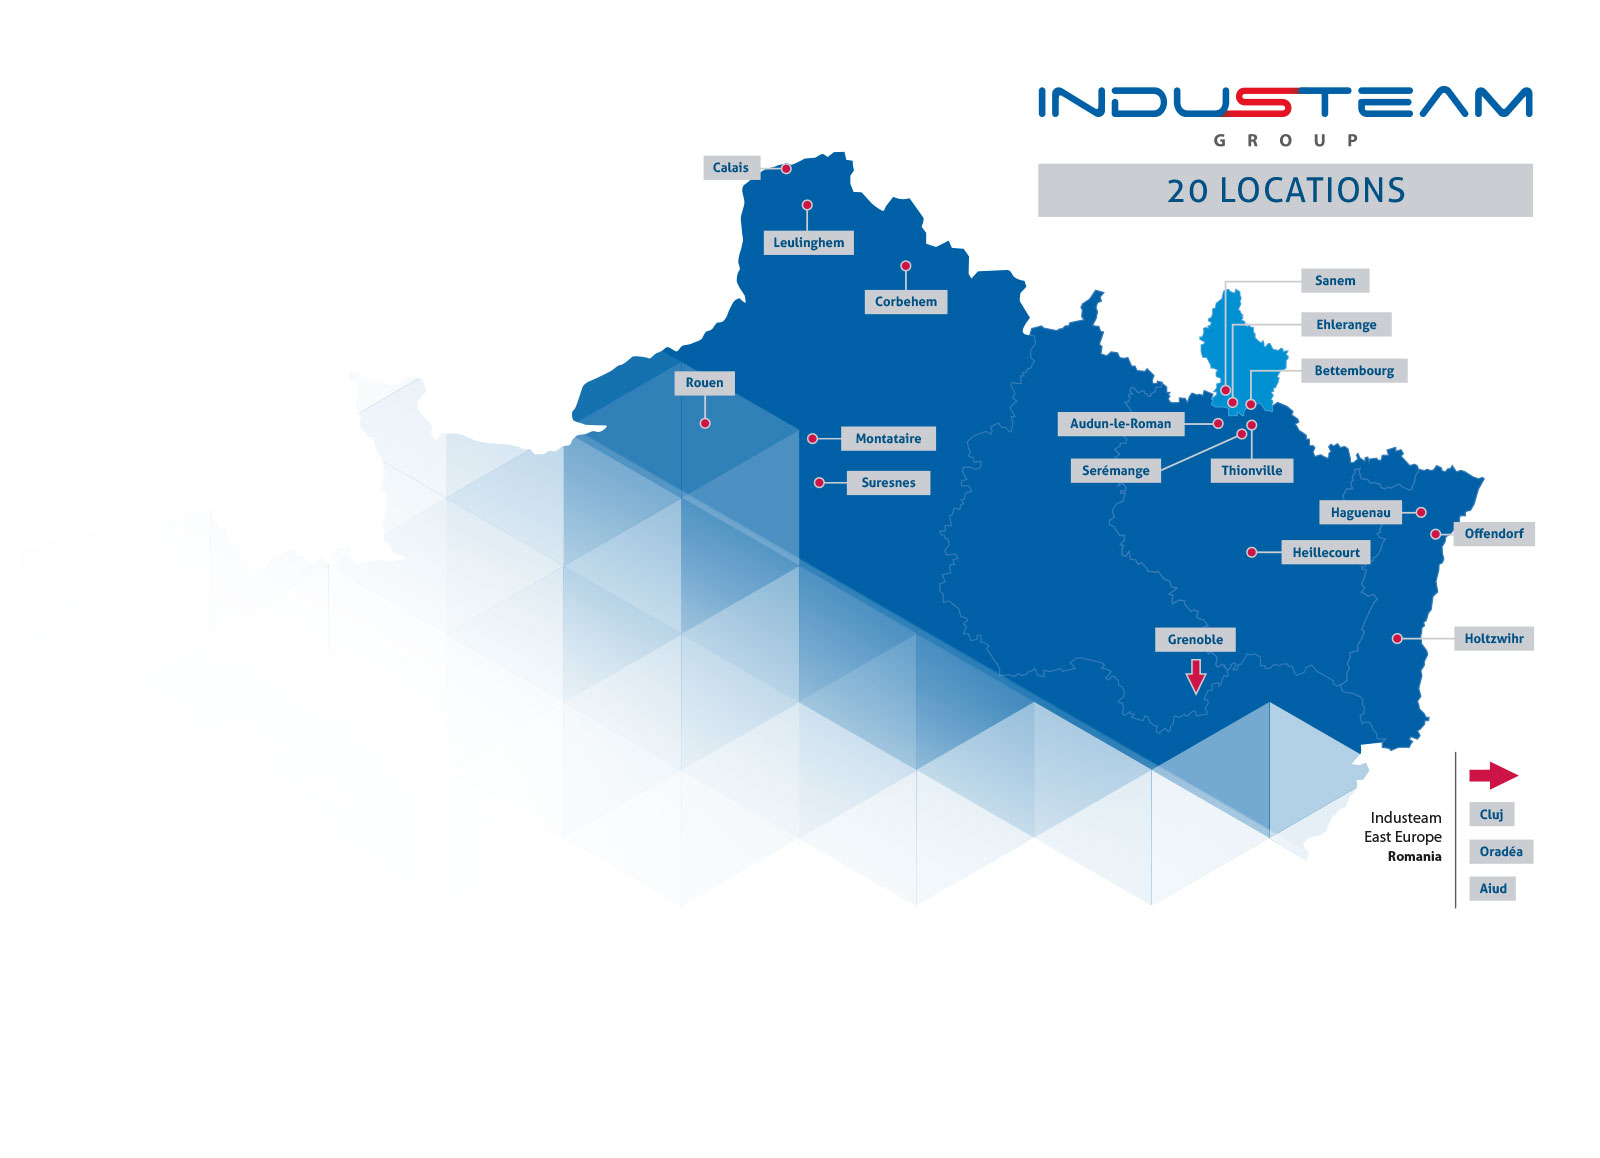 INDUSTEAM's locations in France and Romania